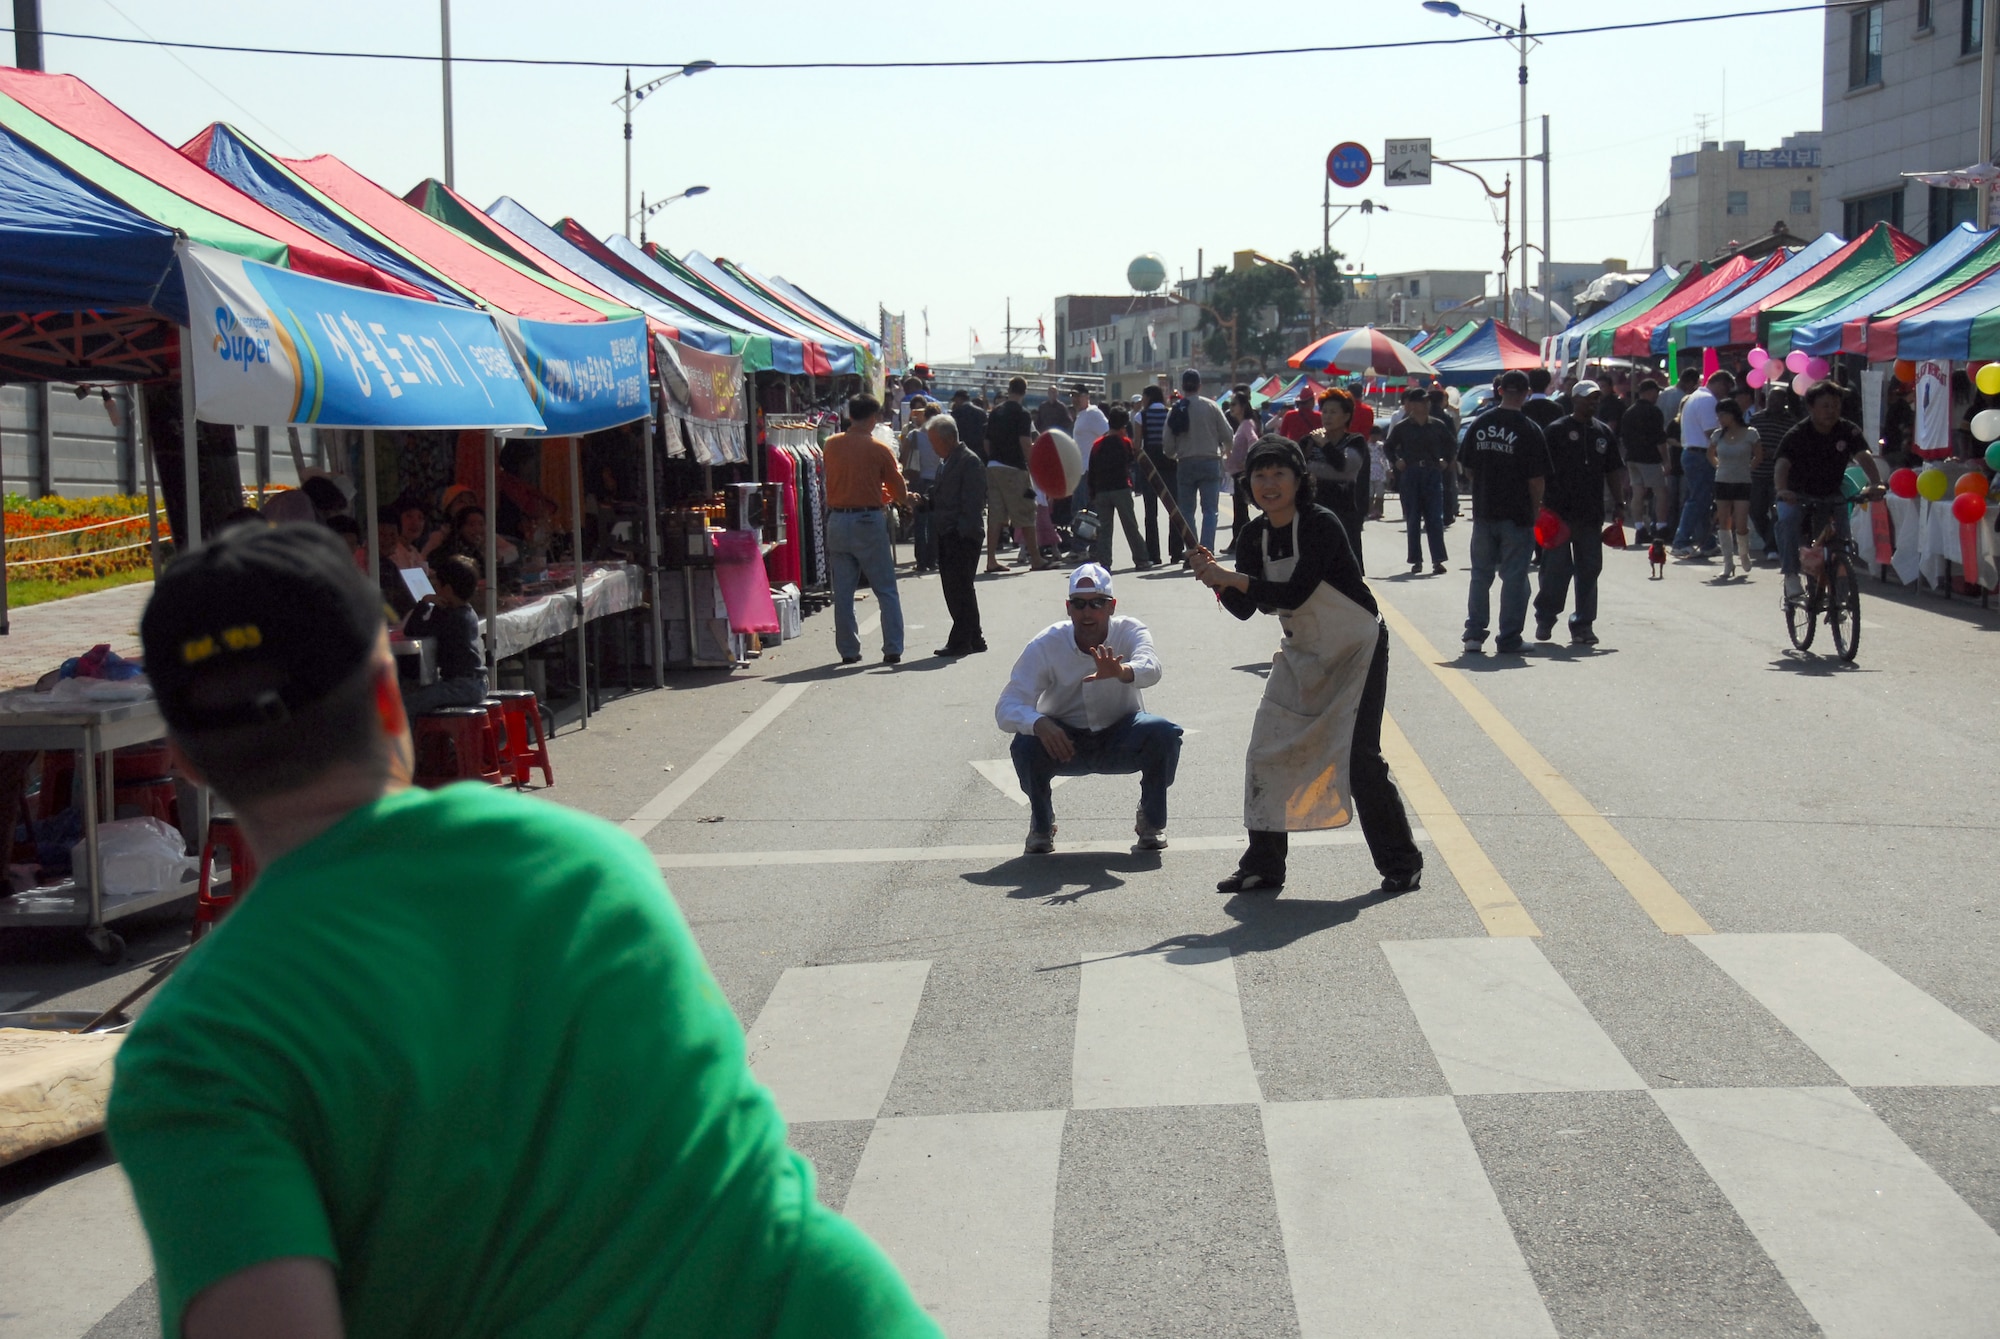 OSAN AIR BASE, Republic of Korea -- A Korean vendor, and Senior Master Sgt. Marvin Krause use a makeshift bat and ball to play baseball; a game that is popular in both countries.  Interaction and games like these are the intent of this year's themes, "We go together and "Be a good neighbor." during the Korean/American Friendship Festival on Oct. 15, 2007 (U.S. Air Force photo by Staff Sgt. Ronnie Hill) (Released)